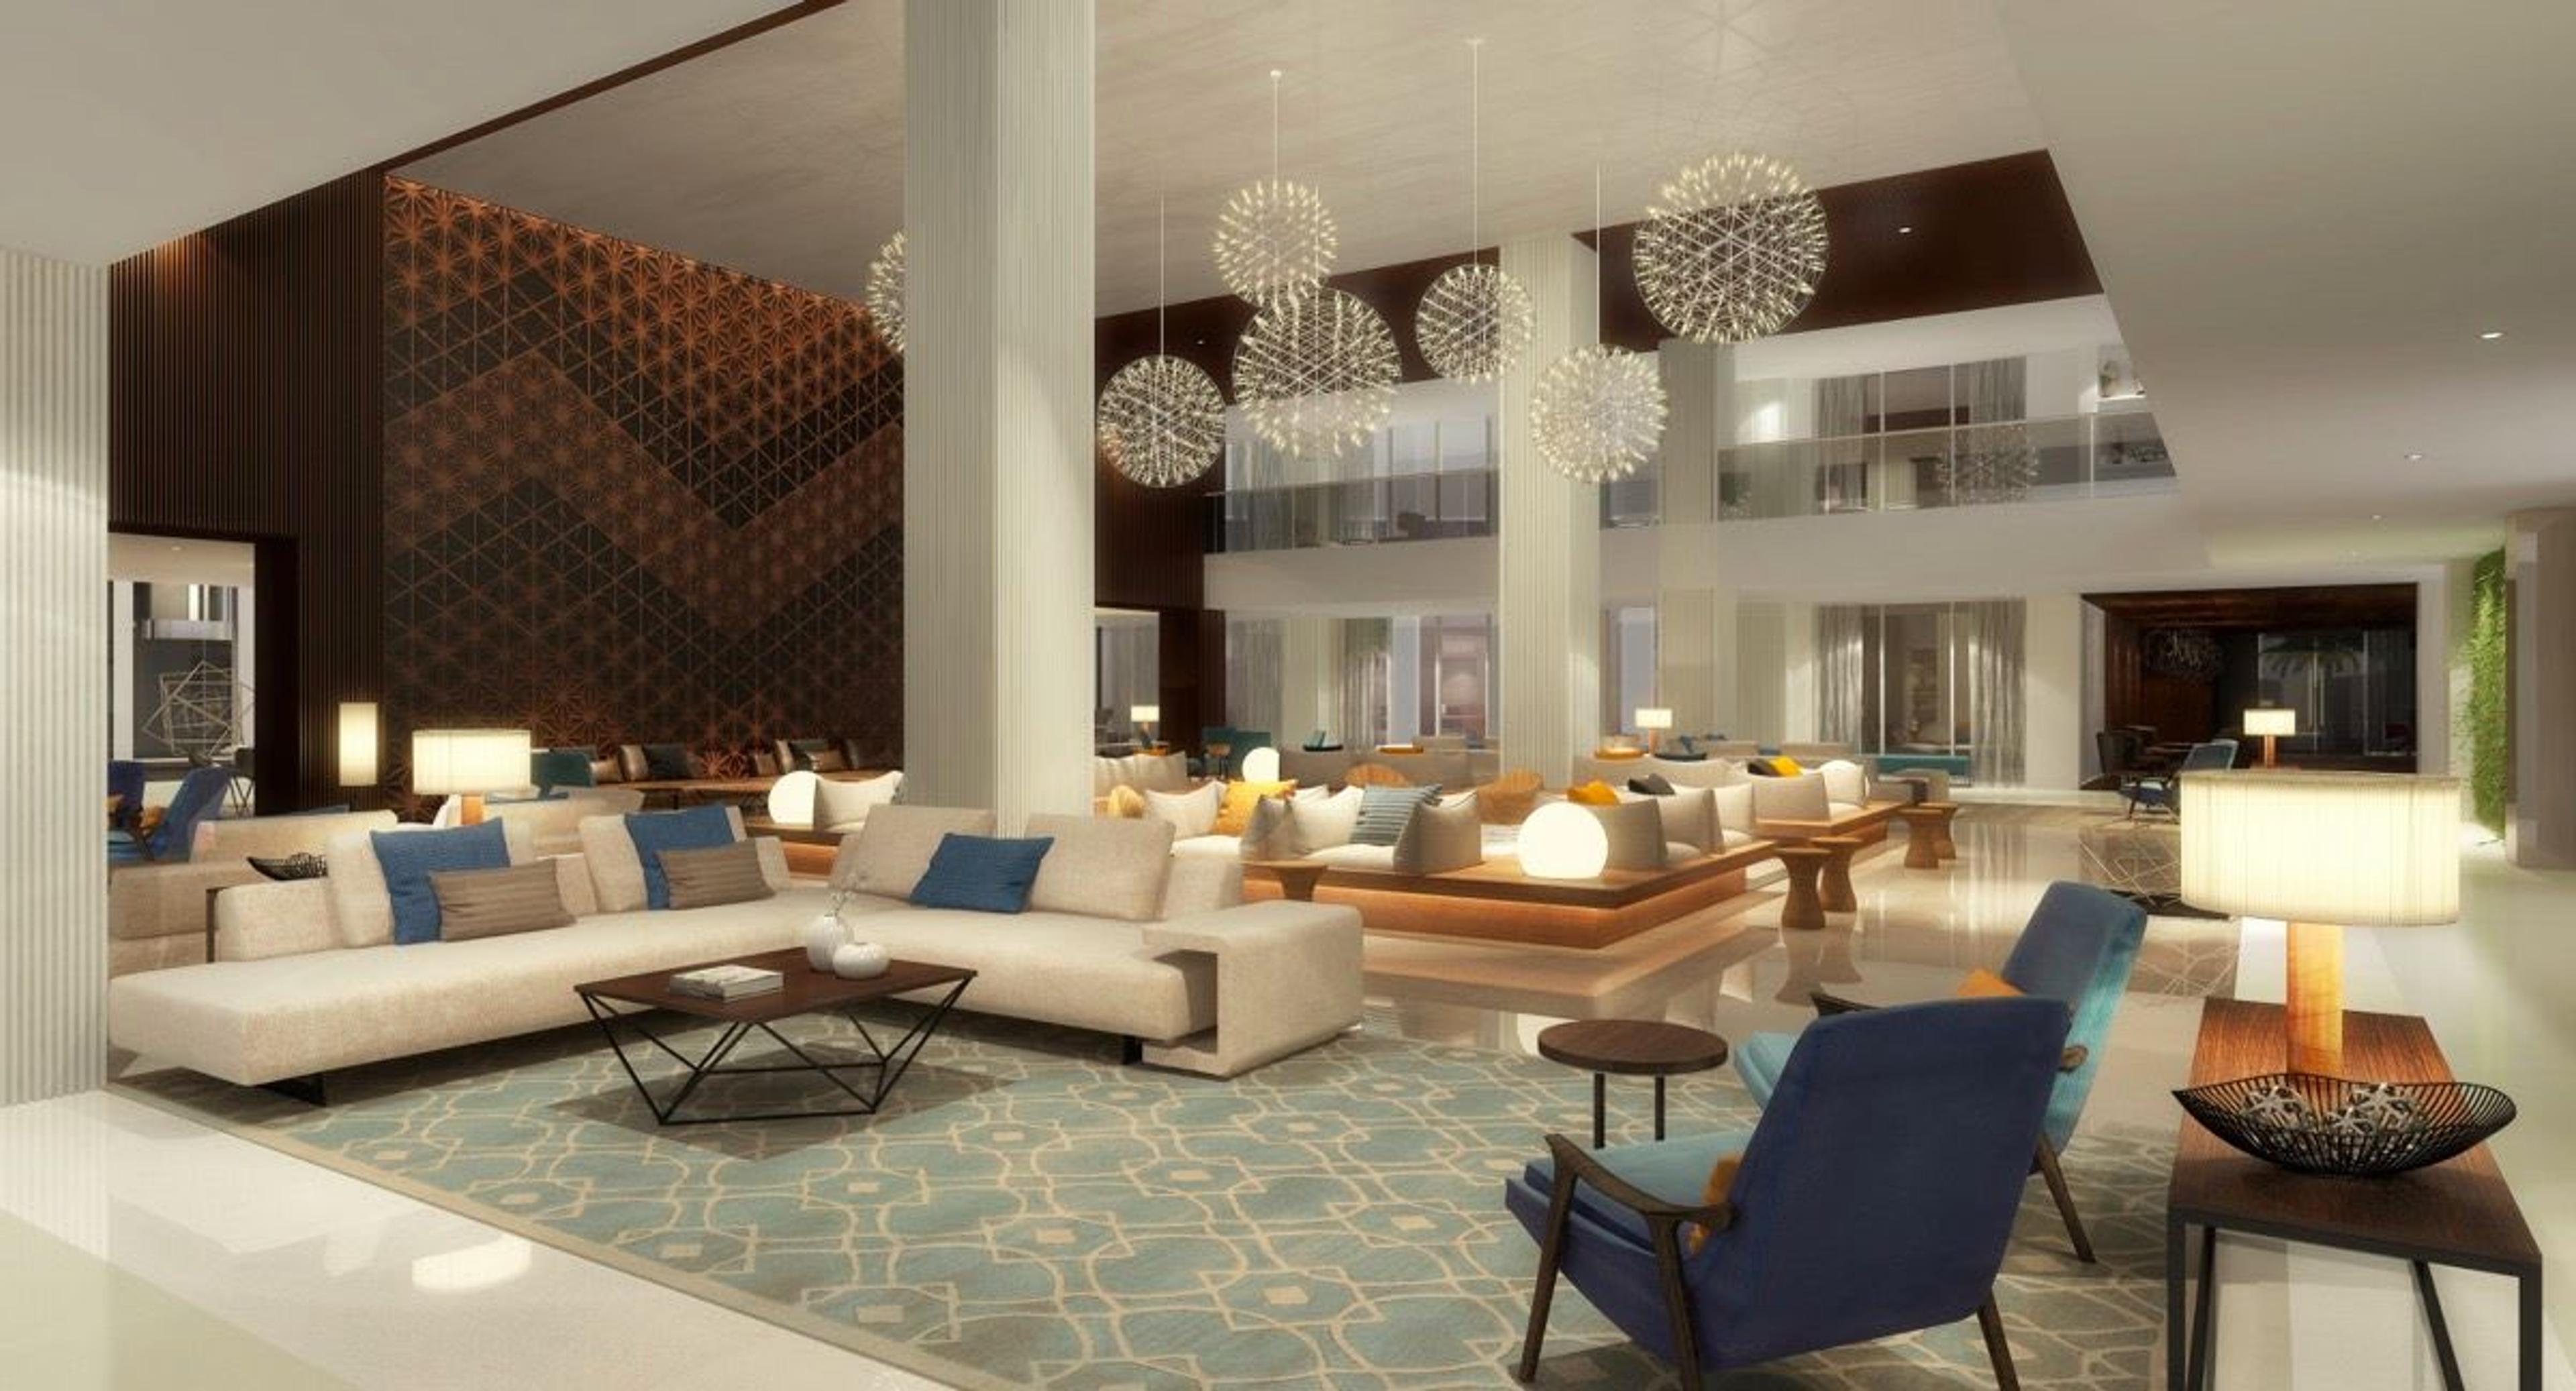 Hilton, Masdar City – First Eco Sustainable Hotel in the World